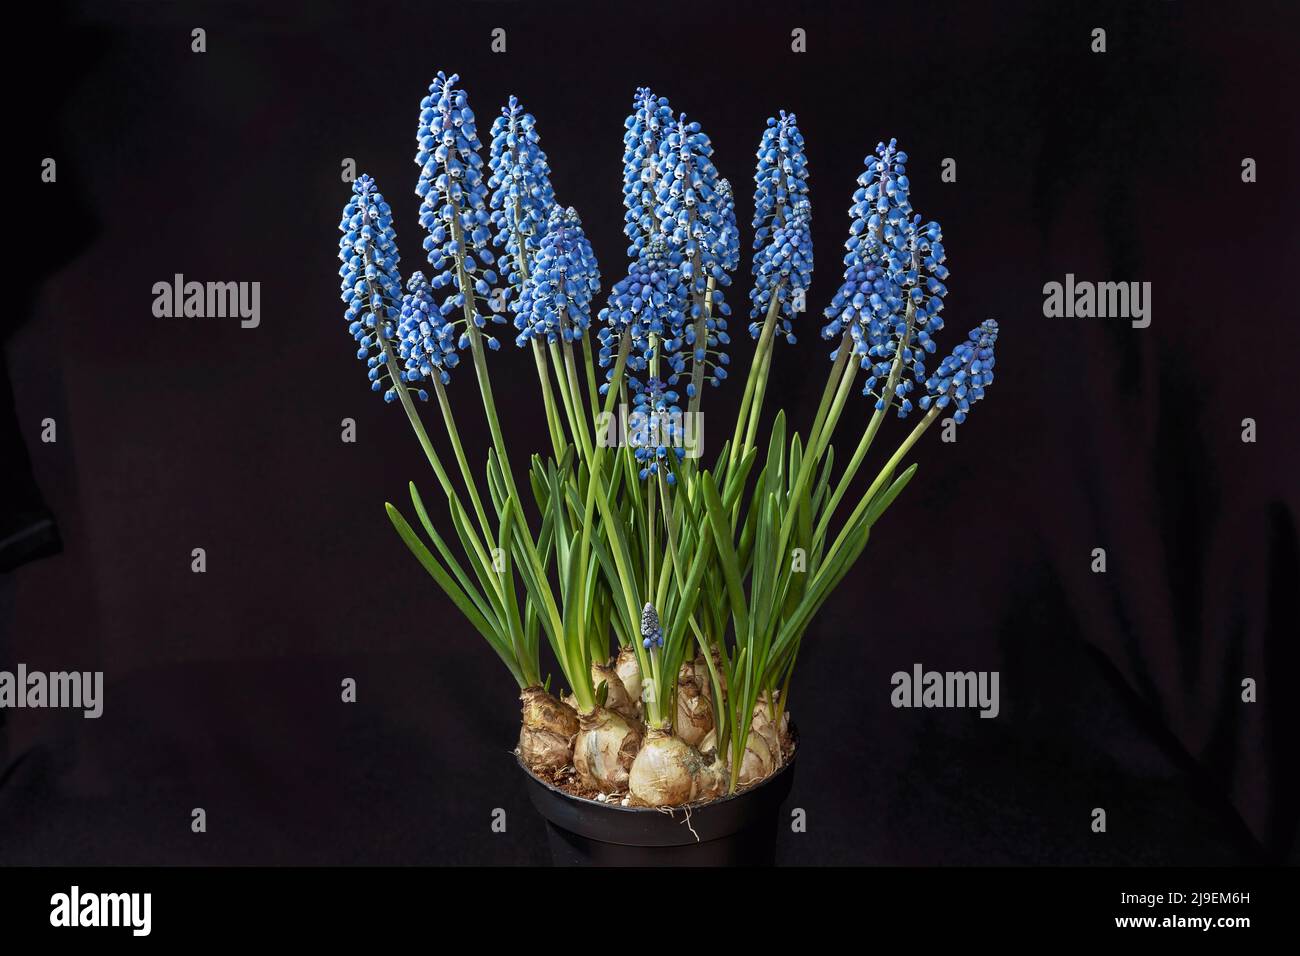 large cluster of bright royal blue grape hyacinth Muscari bulbs blooming in a small pot against a black background Stock Photo